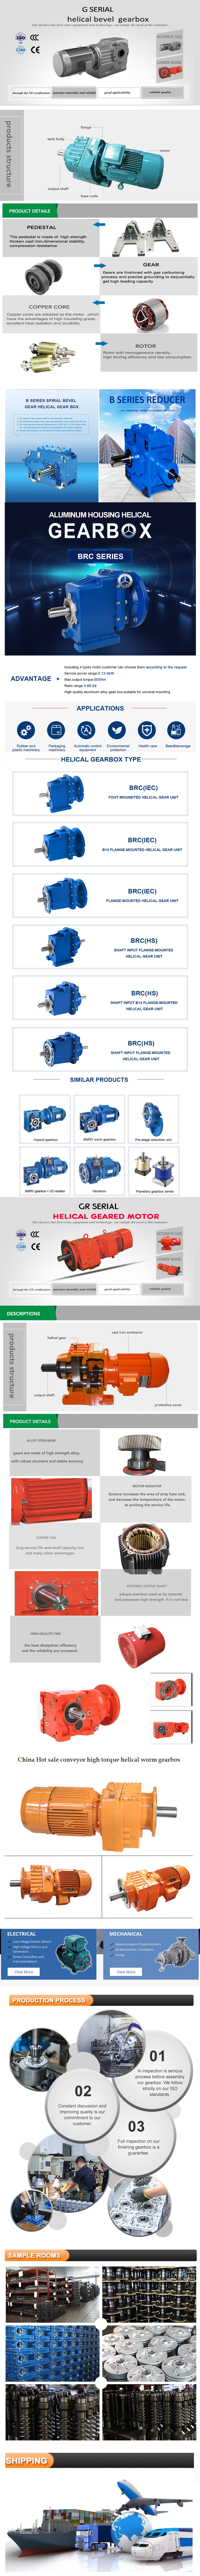   in Maracay Venezuela (Bolivarian Republic of)  sales   price   shop   near me   near me shop   factory   supplier Worm Reduction Gearbox Speed Reducer Gear Box Speed Simply Servo-Worm Reducers and Splitpinion Split Pinion Interchange with Helical Application manufacturer   best   Cost   Custom   Cheap   wholesaler 